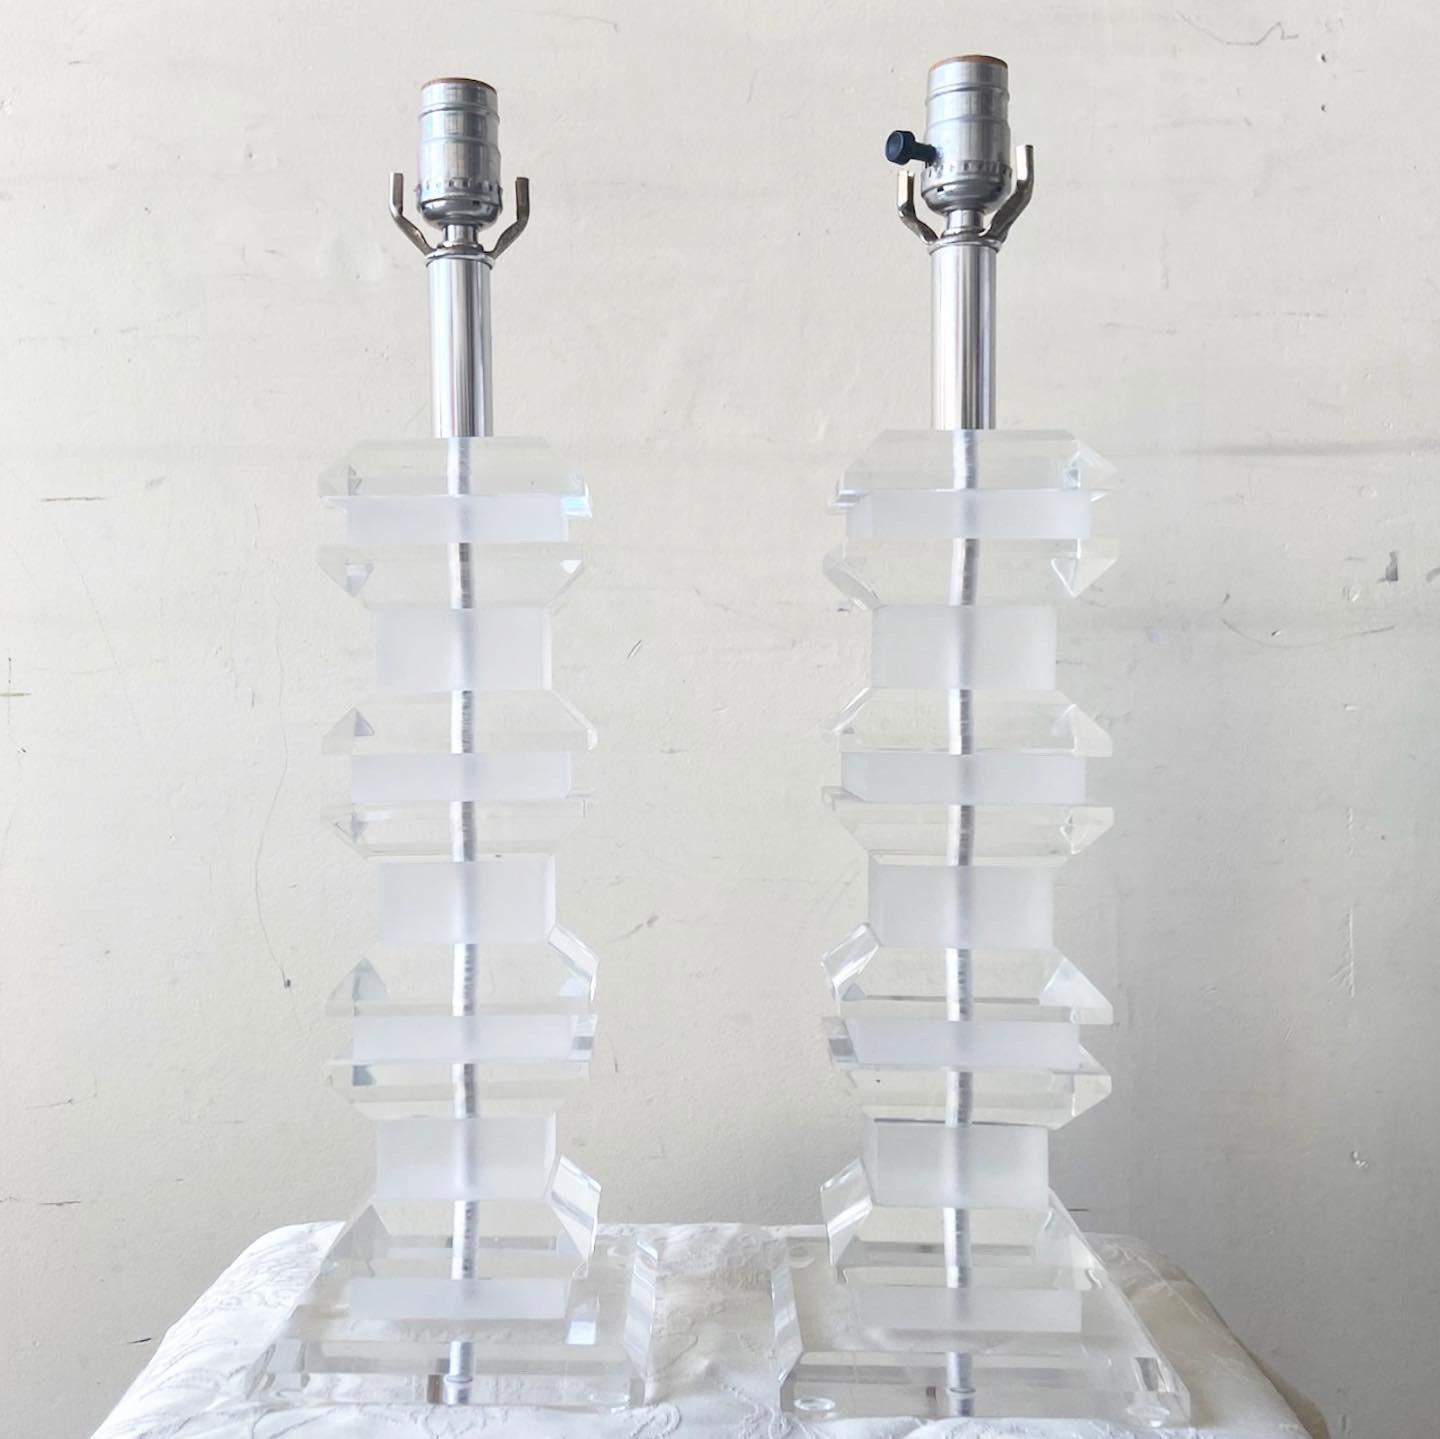 Amazing pair of mid Century Modern lucite table lamps. Each features a stacked lucite pagoda body.

3 way lighting
